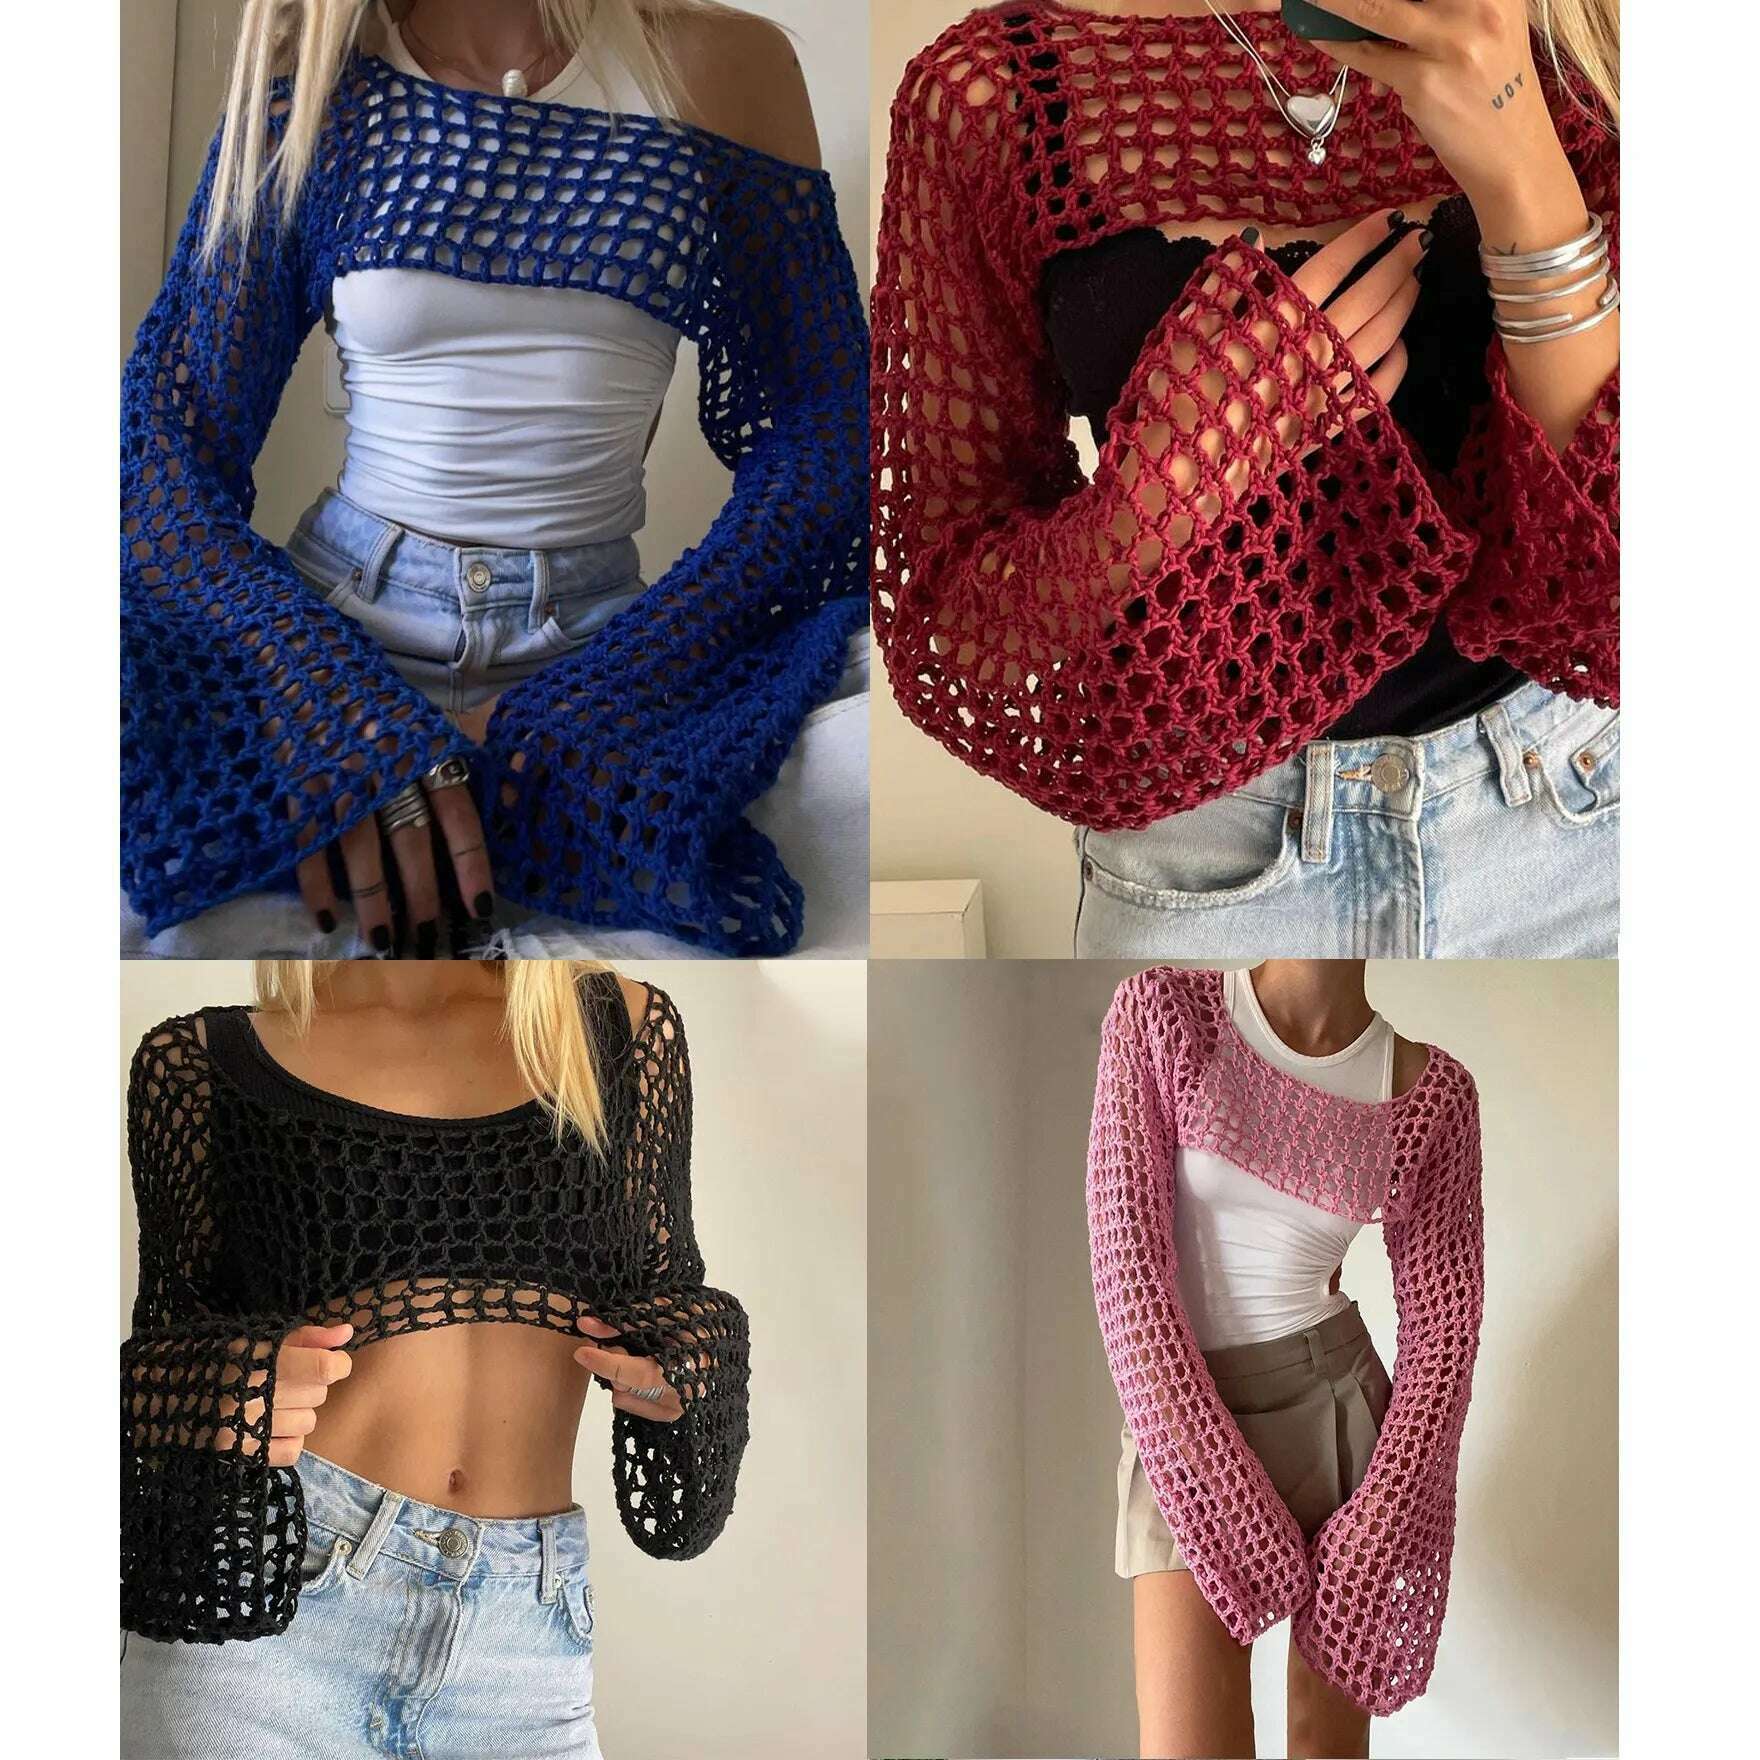 2023 Summer Y2k Crochet Knit Hollow Out Tops Vintage Mesh Top Grunge Clothes 2000s Aesthetic Mesh Sweatshirt Crop Top for Women